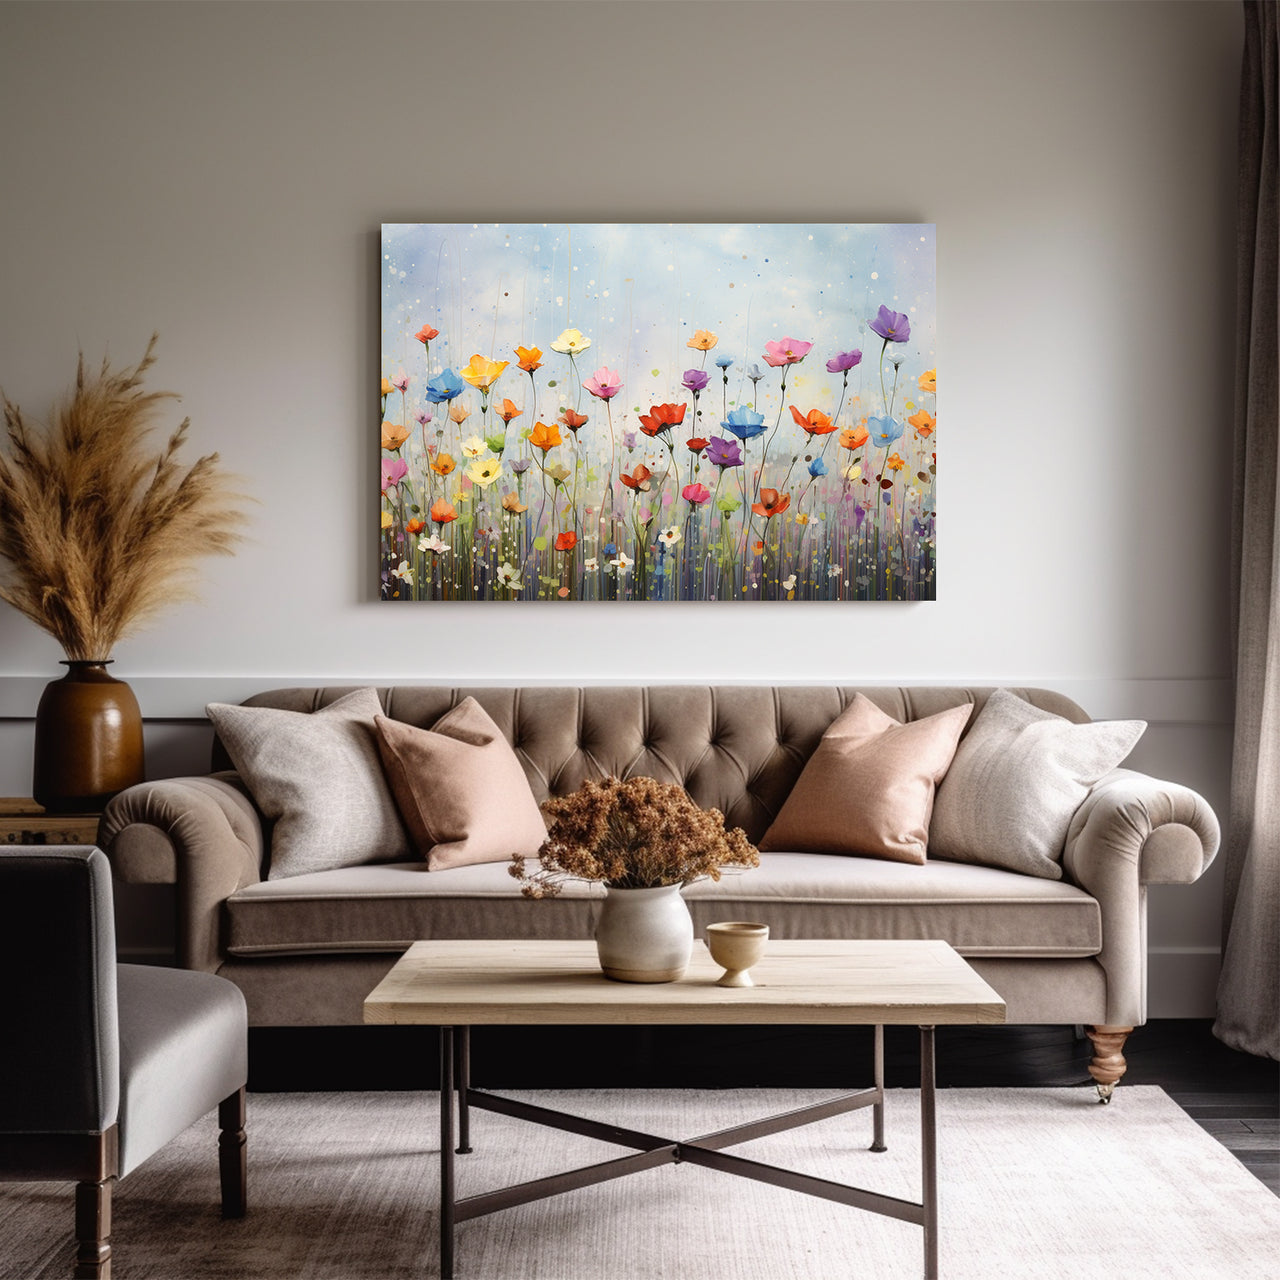 Wildflowers on Canvas, Flowers in Rain 01, Minimalist Flower Wall Art, Abstract Wall Art, Watercolor flowers, Floral Print, Classic, Rustic Farmhouse, Wildflower Home Decor, Flower Painting Canvas, Floral Wall Art